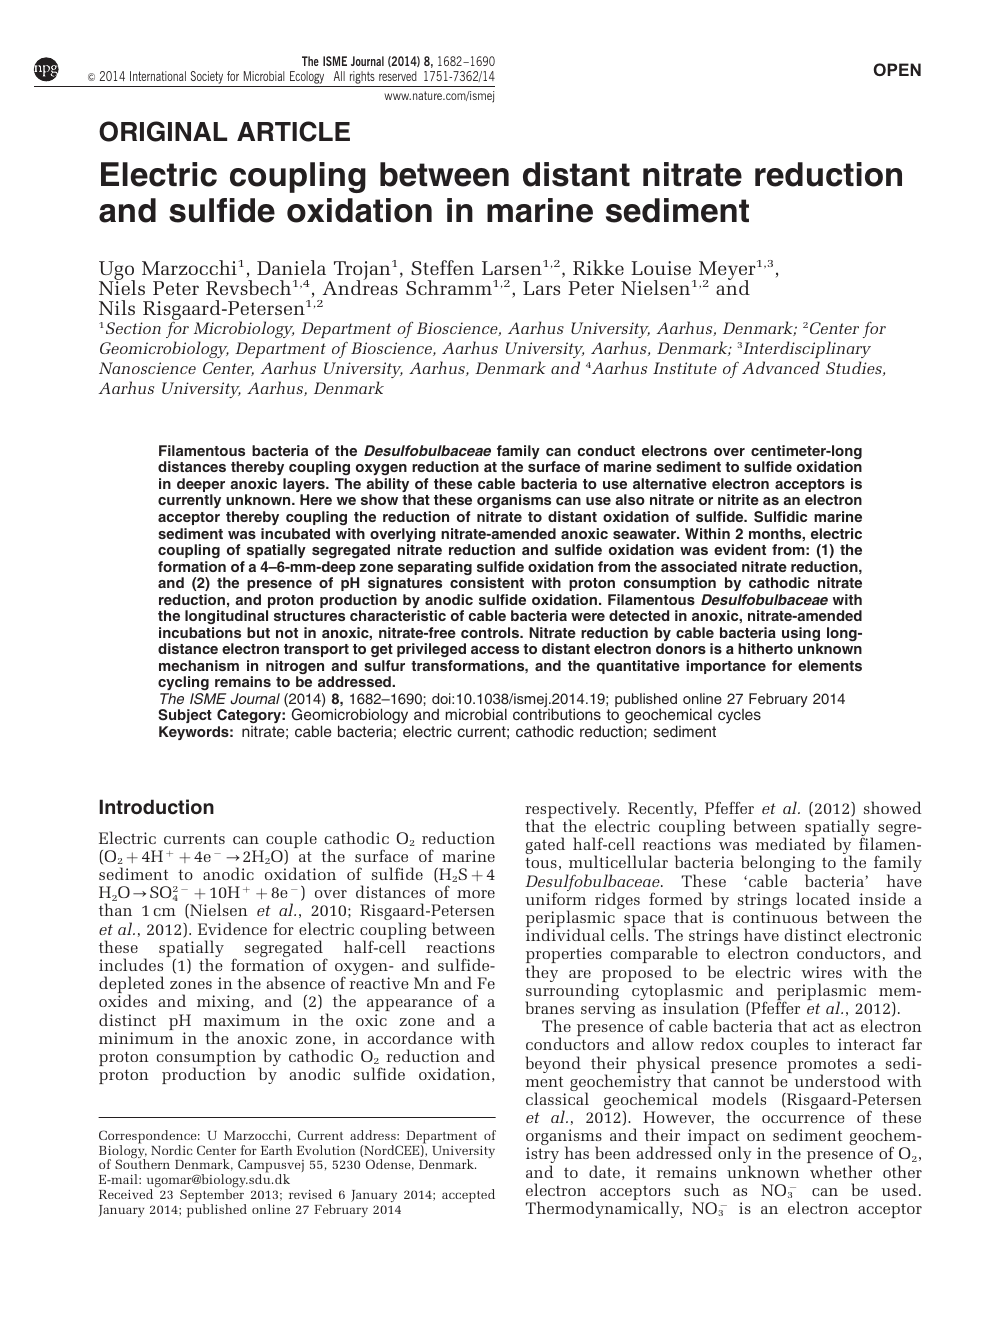 Electric coupling between distant nitrate reduction and sulfide oxidation in marine – topic of research paper in Biological sciences. Download scholarly article PDF and read for on CyberLeninka open science